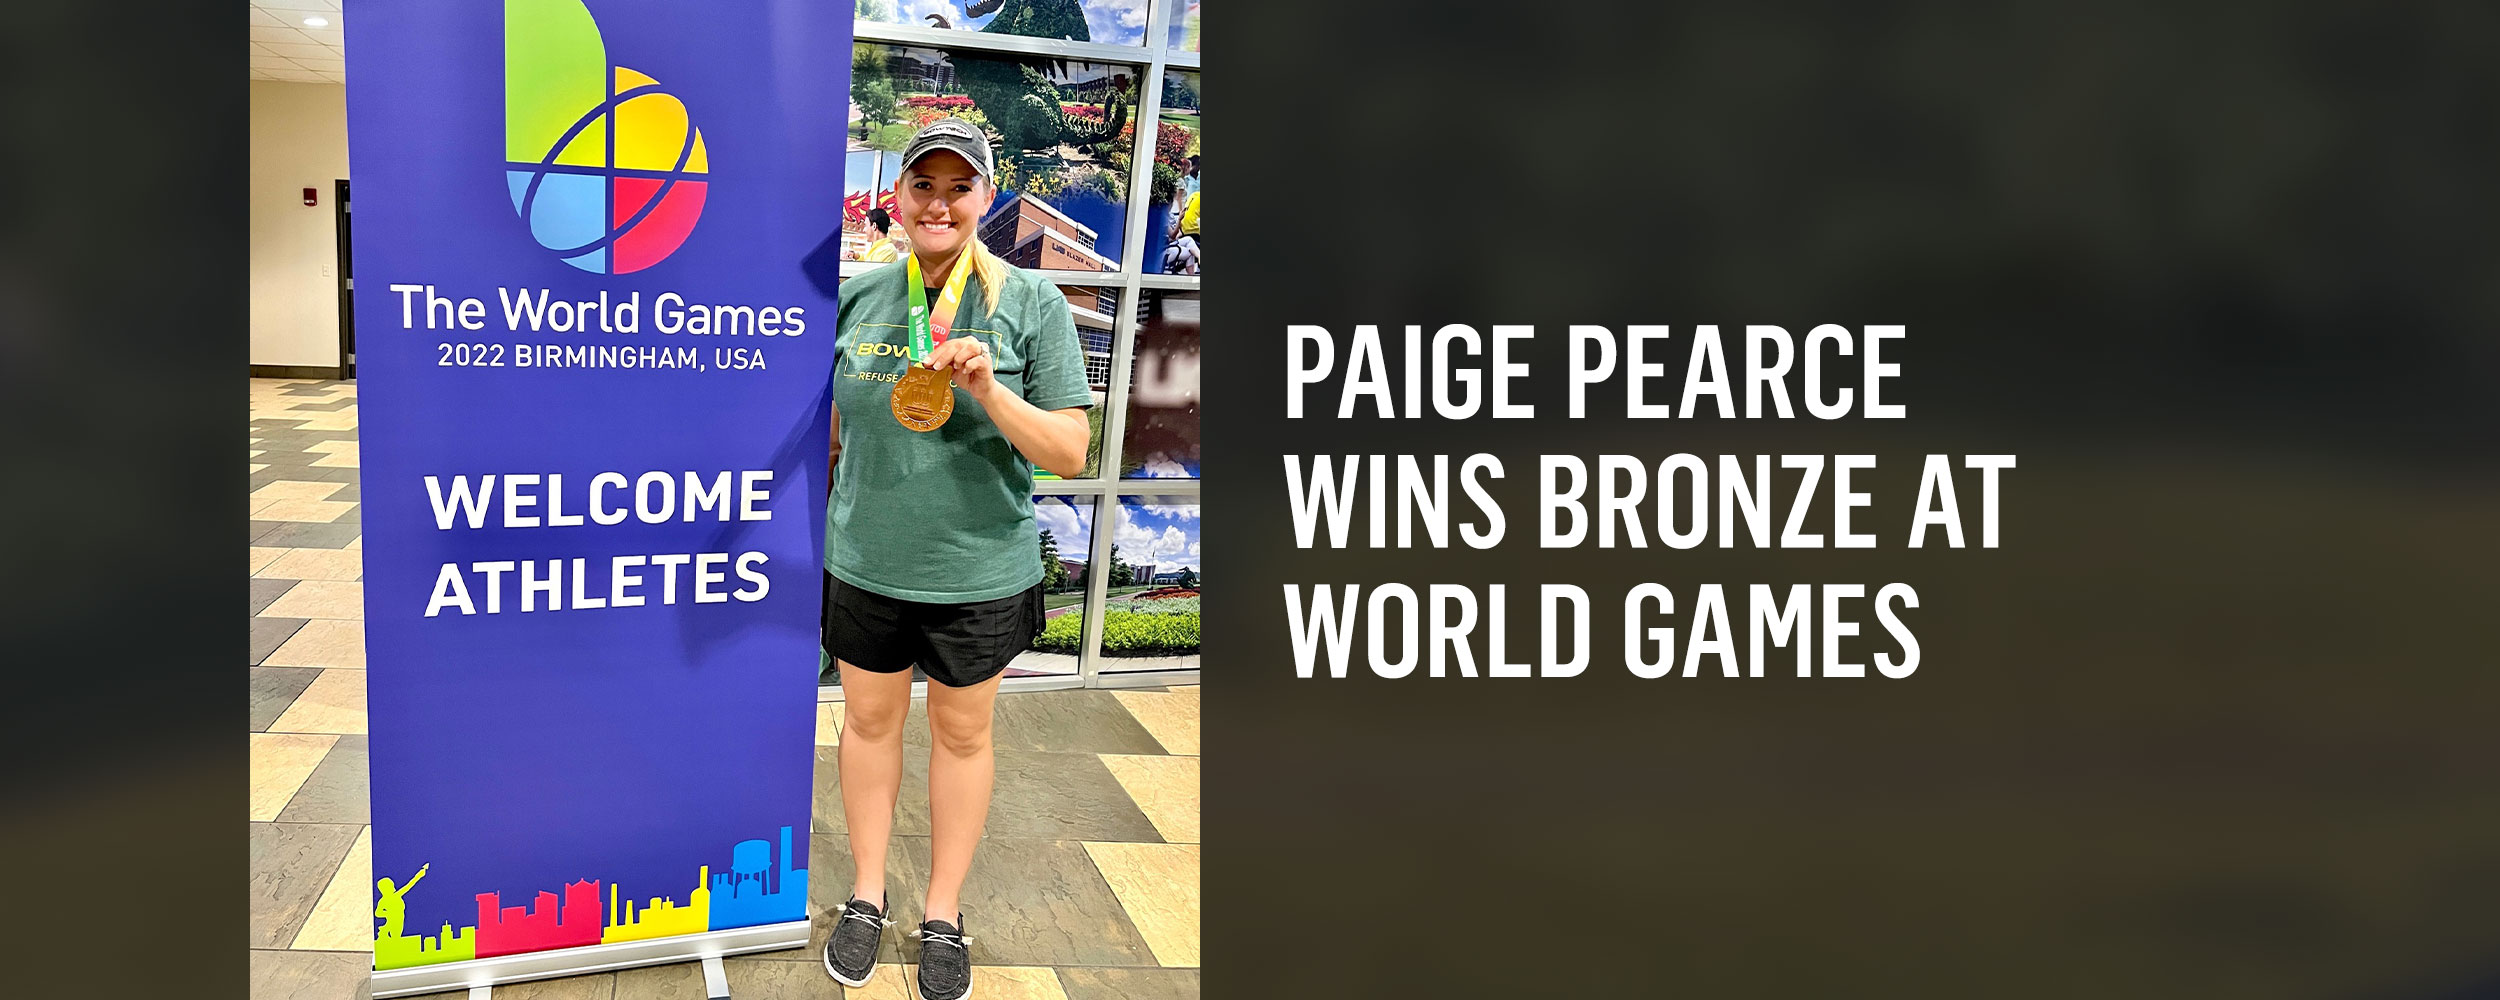 Paige Pearce win bronze at World Games